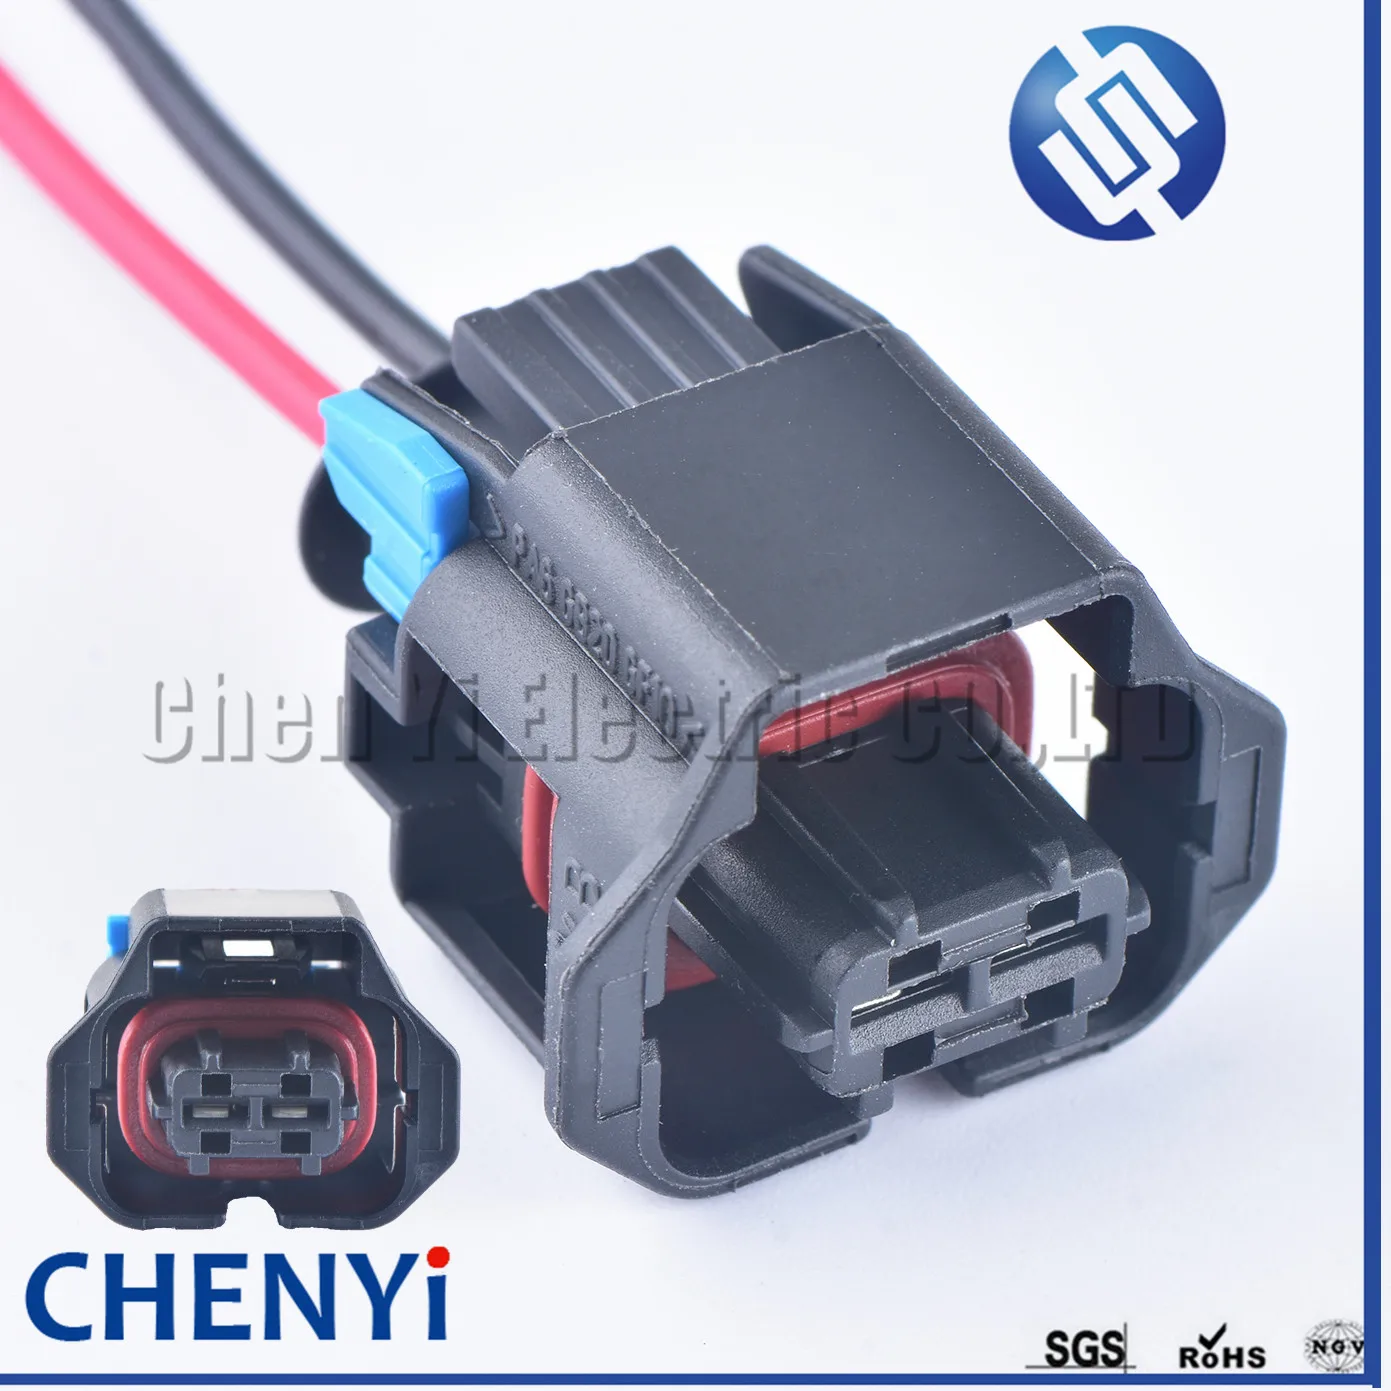 

Delphi 2 Pin female automotive waterproof Connector Fuel injector ignition coil plug Sensor wiring harness pigtail plug 15397337